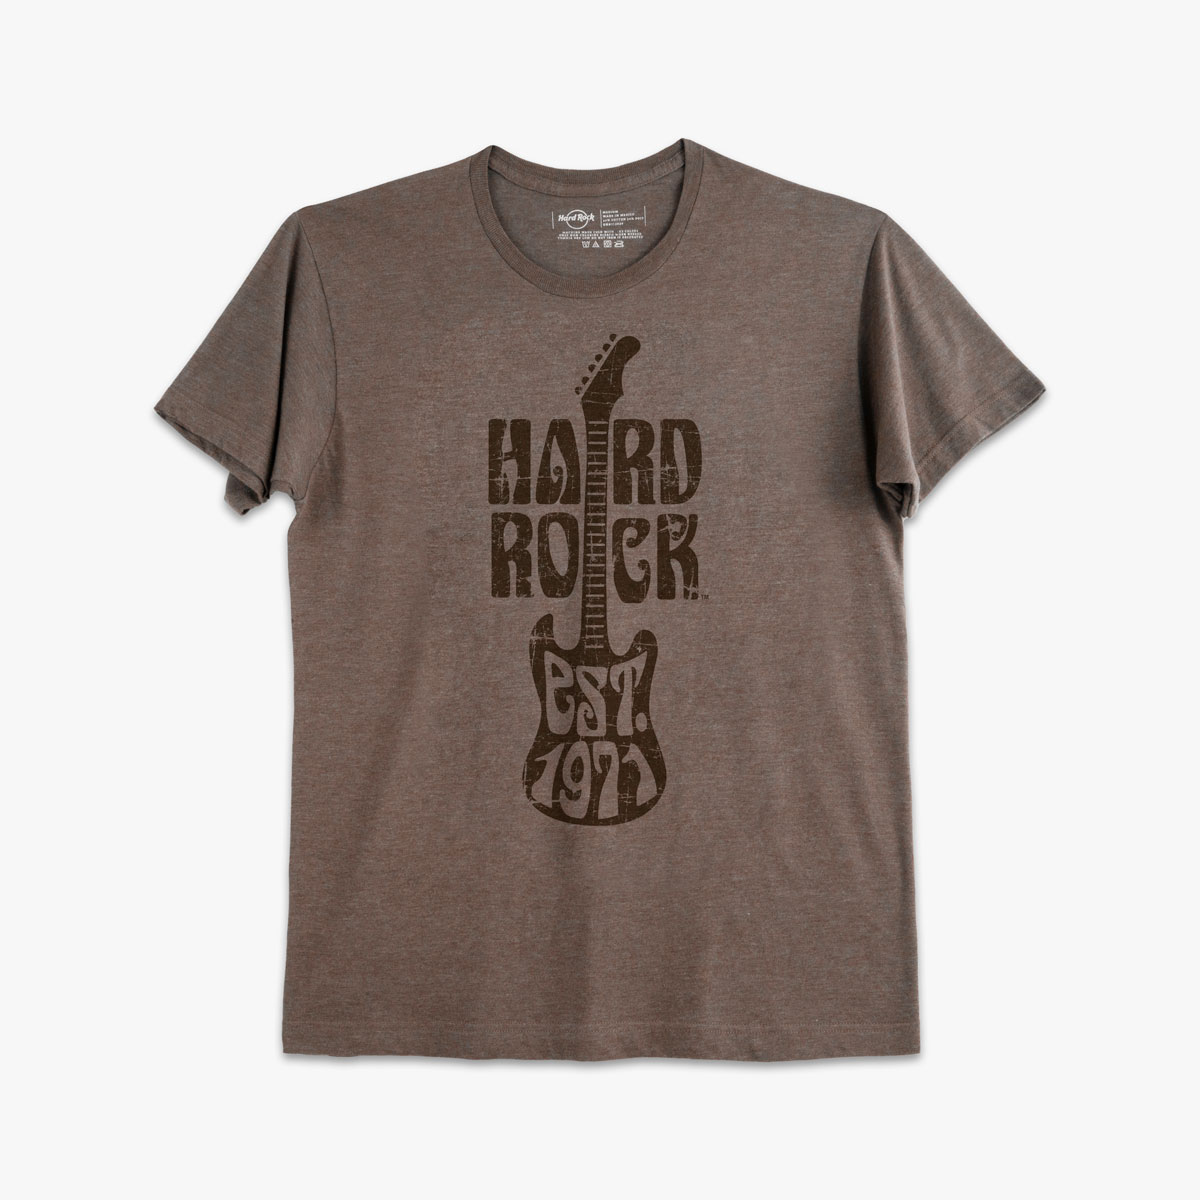 Hard Rock Adult Fit Festival Tee with Logo Guitar Est 1971 in Brown image number 2